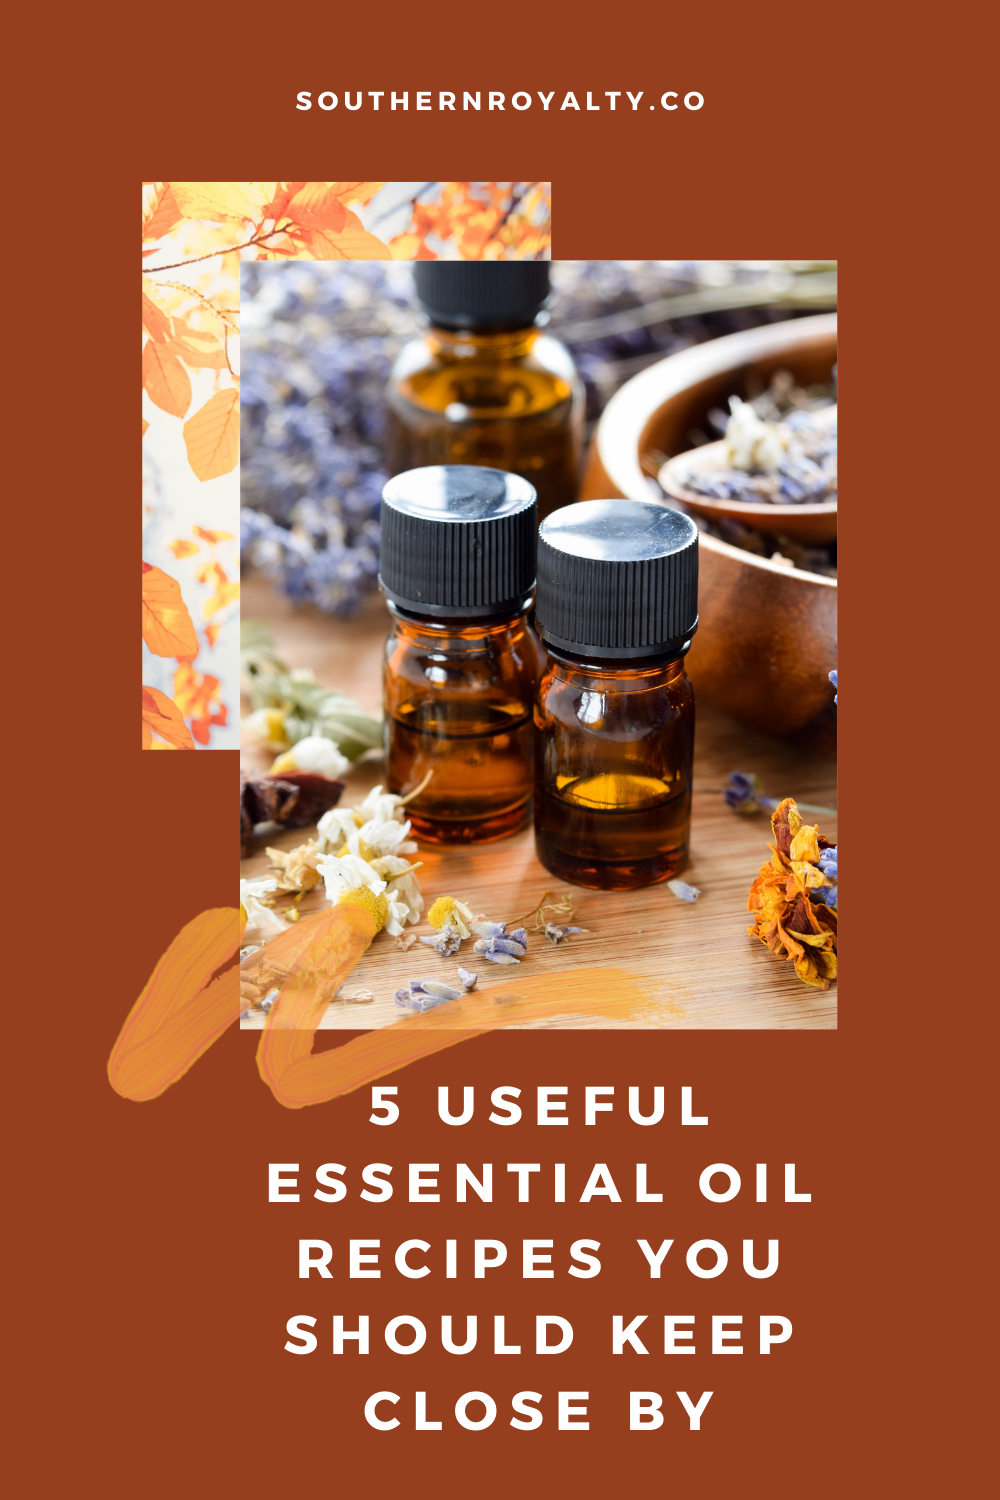 Essential oil recipes for everyday aliments